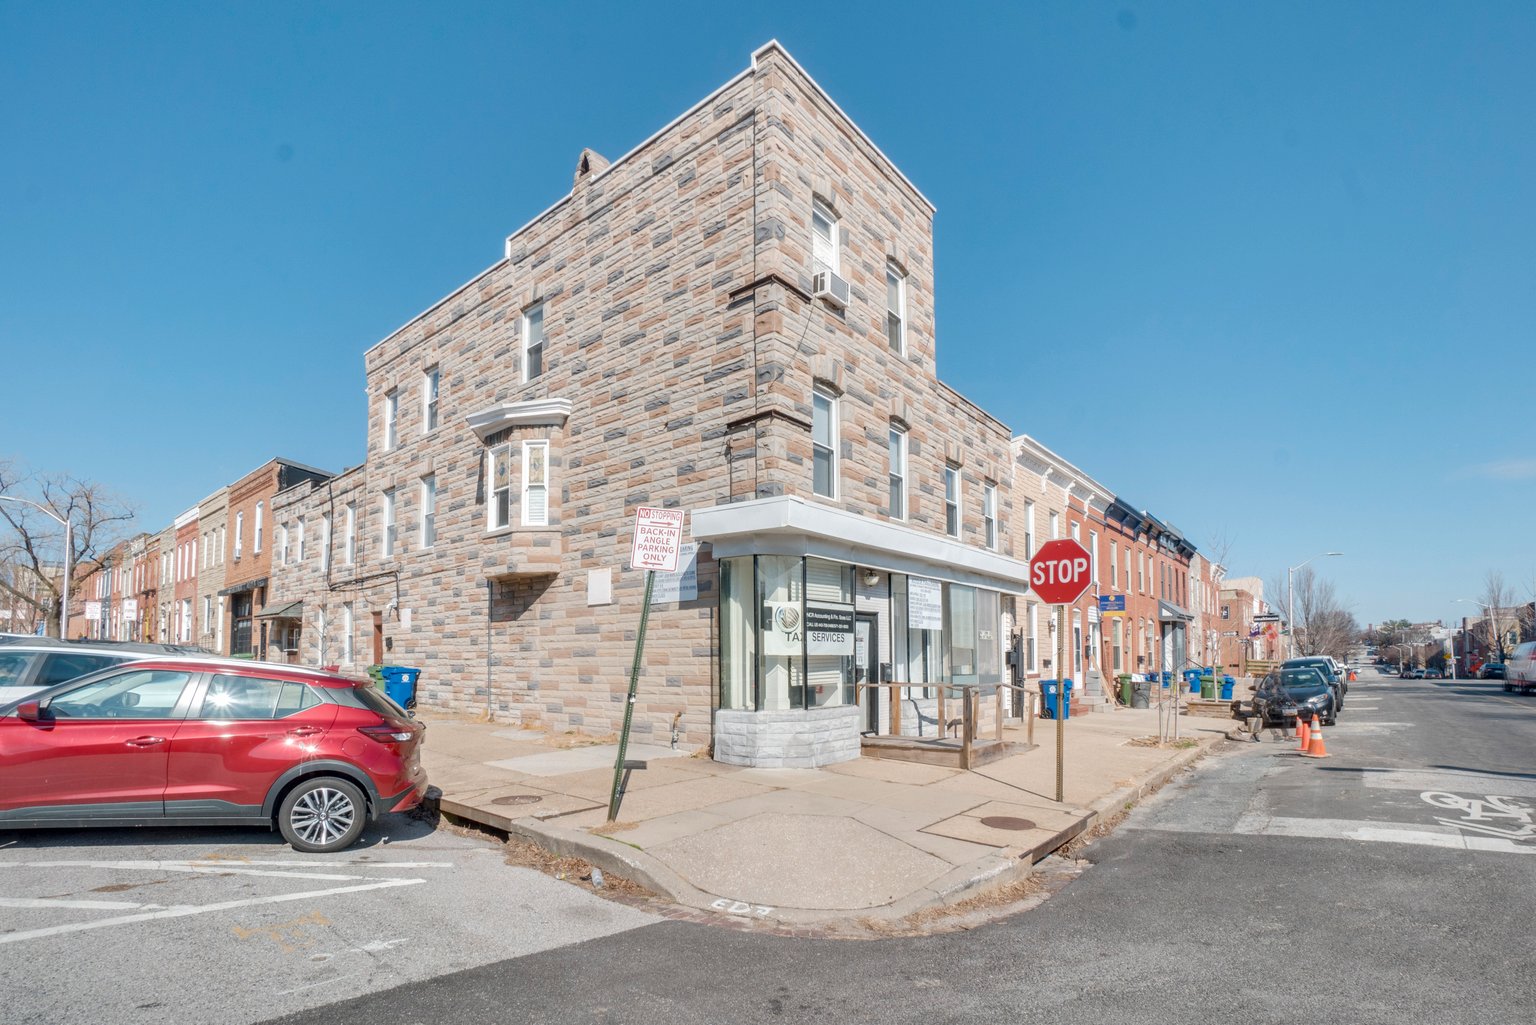 2500 Fait Avenue: 3 Apartments/ 2 Retail Spaces in the Heart of Canton/ Value Add Opportunity/ Corner Lot